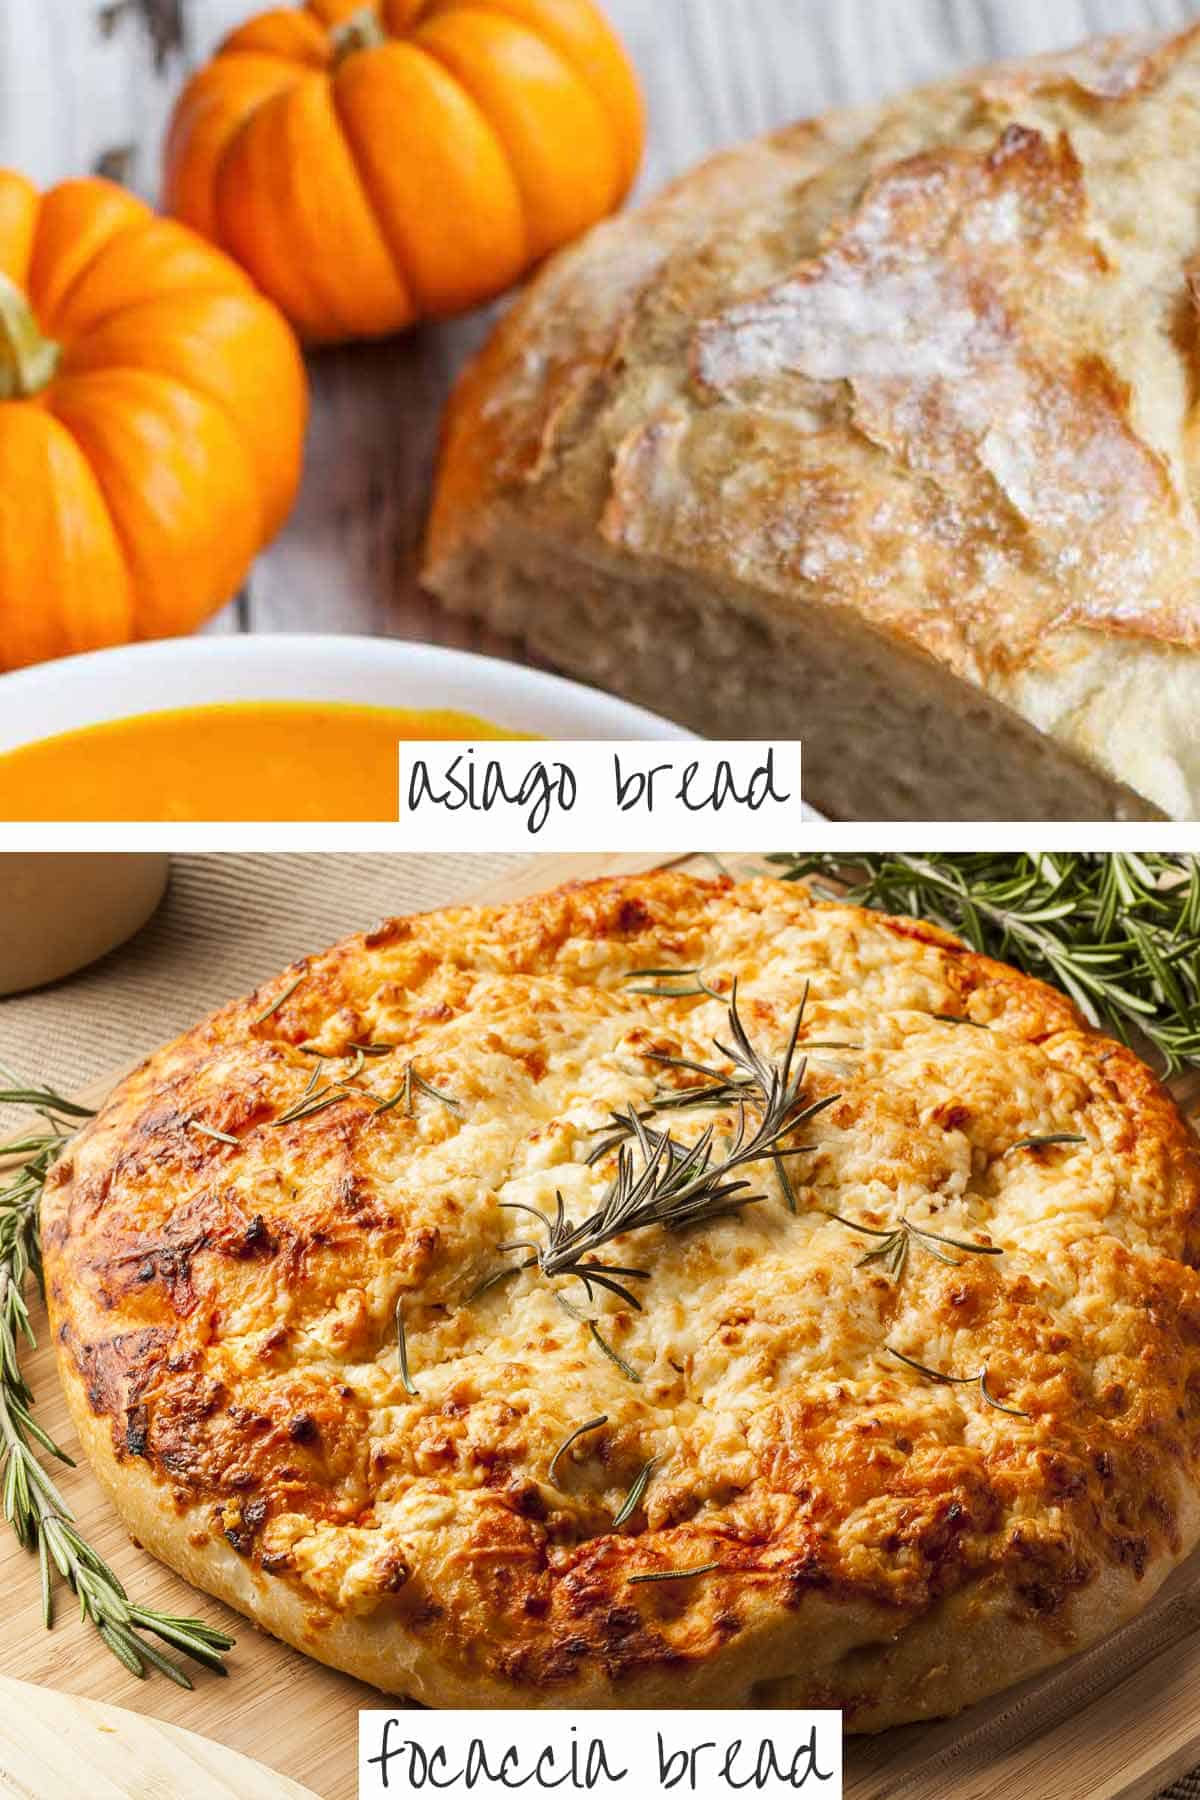 Asiago bread next to pumpkin soup and a breadboard with focaccia bread garnished with rosemary.